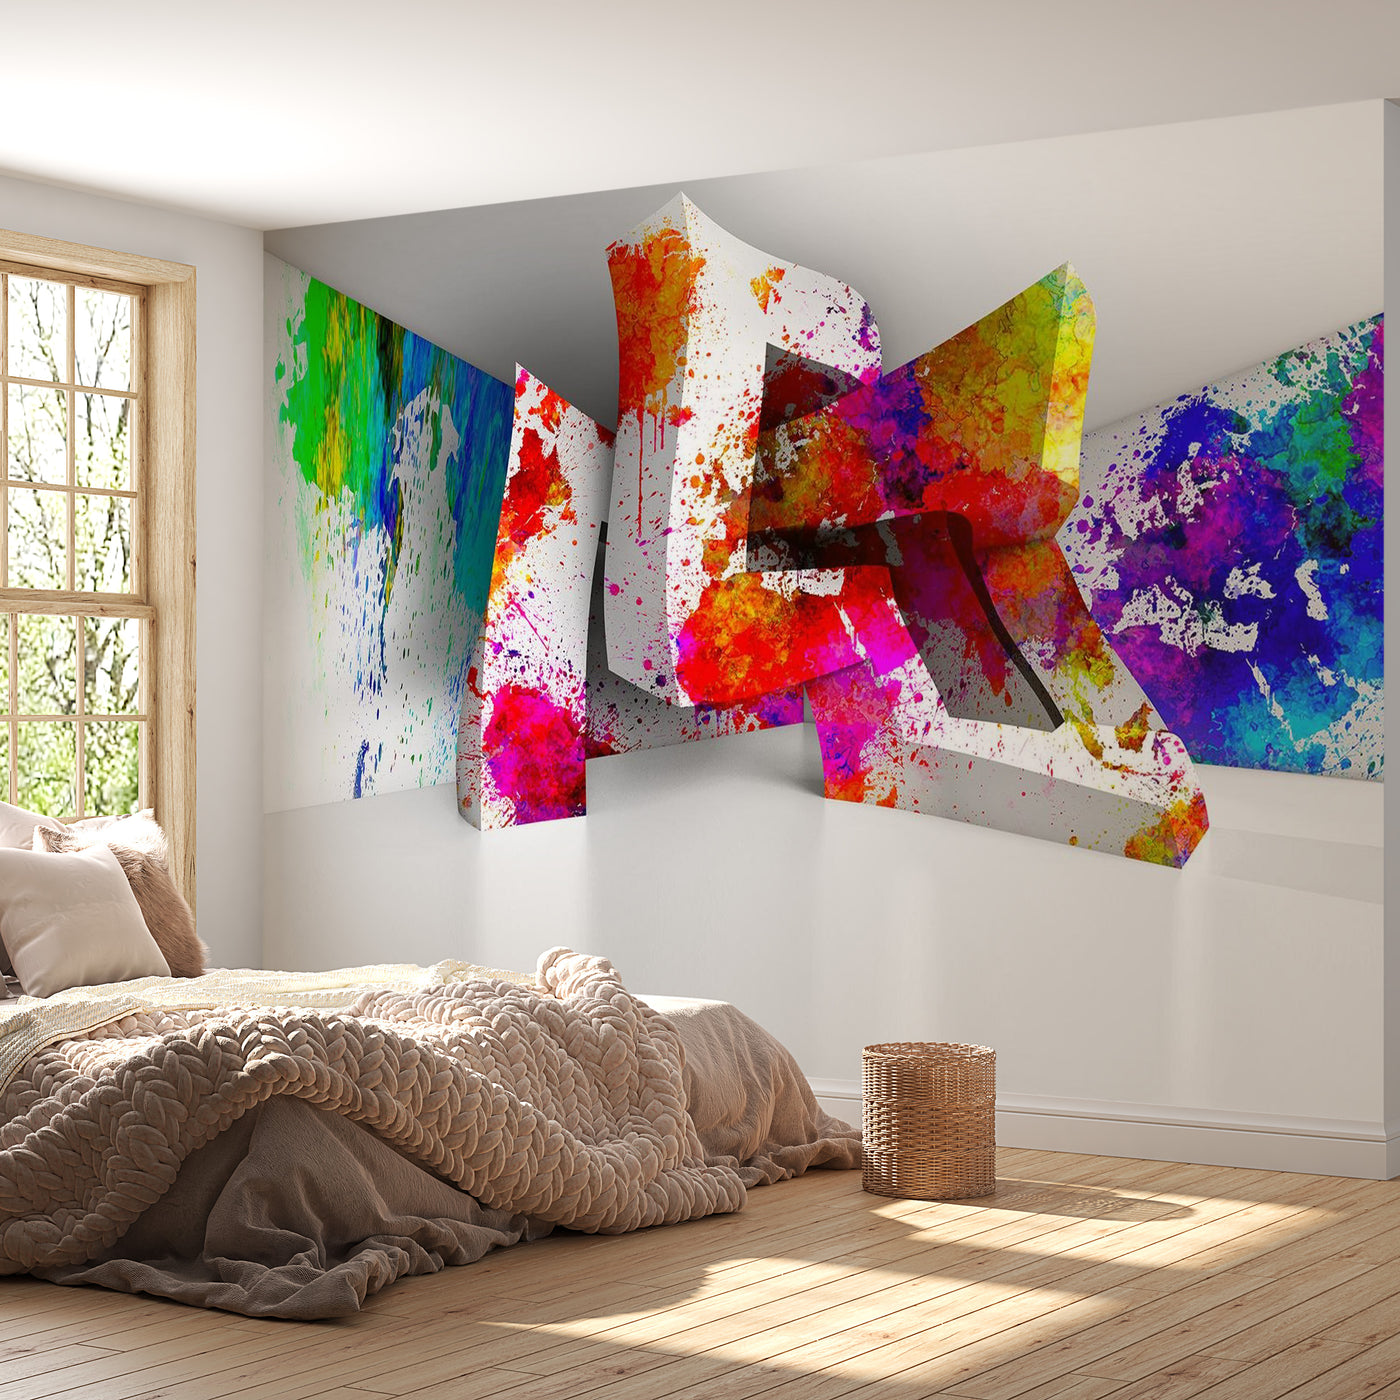 Peel & Stick 3D Illusion Wall Mural - Three-Dimensional Shapes - Removable Wall Decals